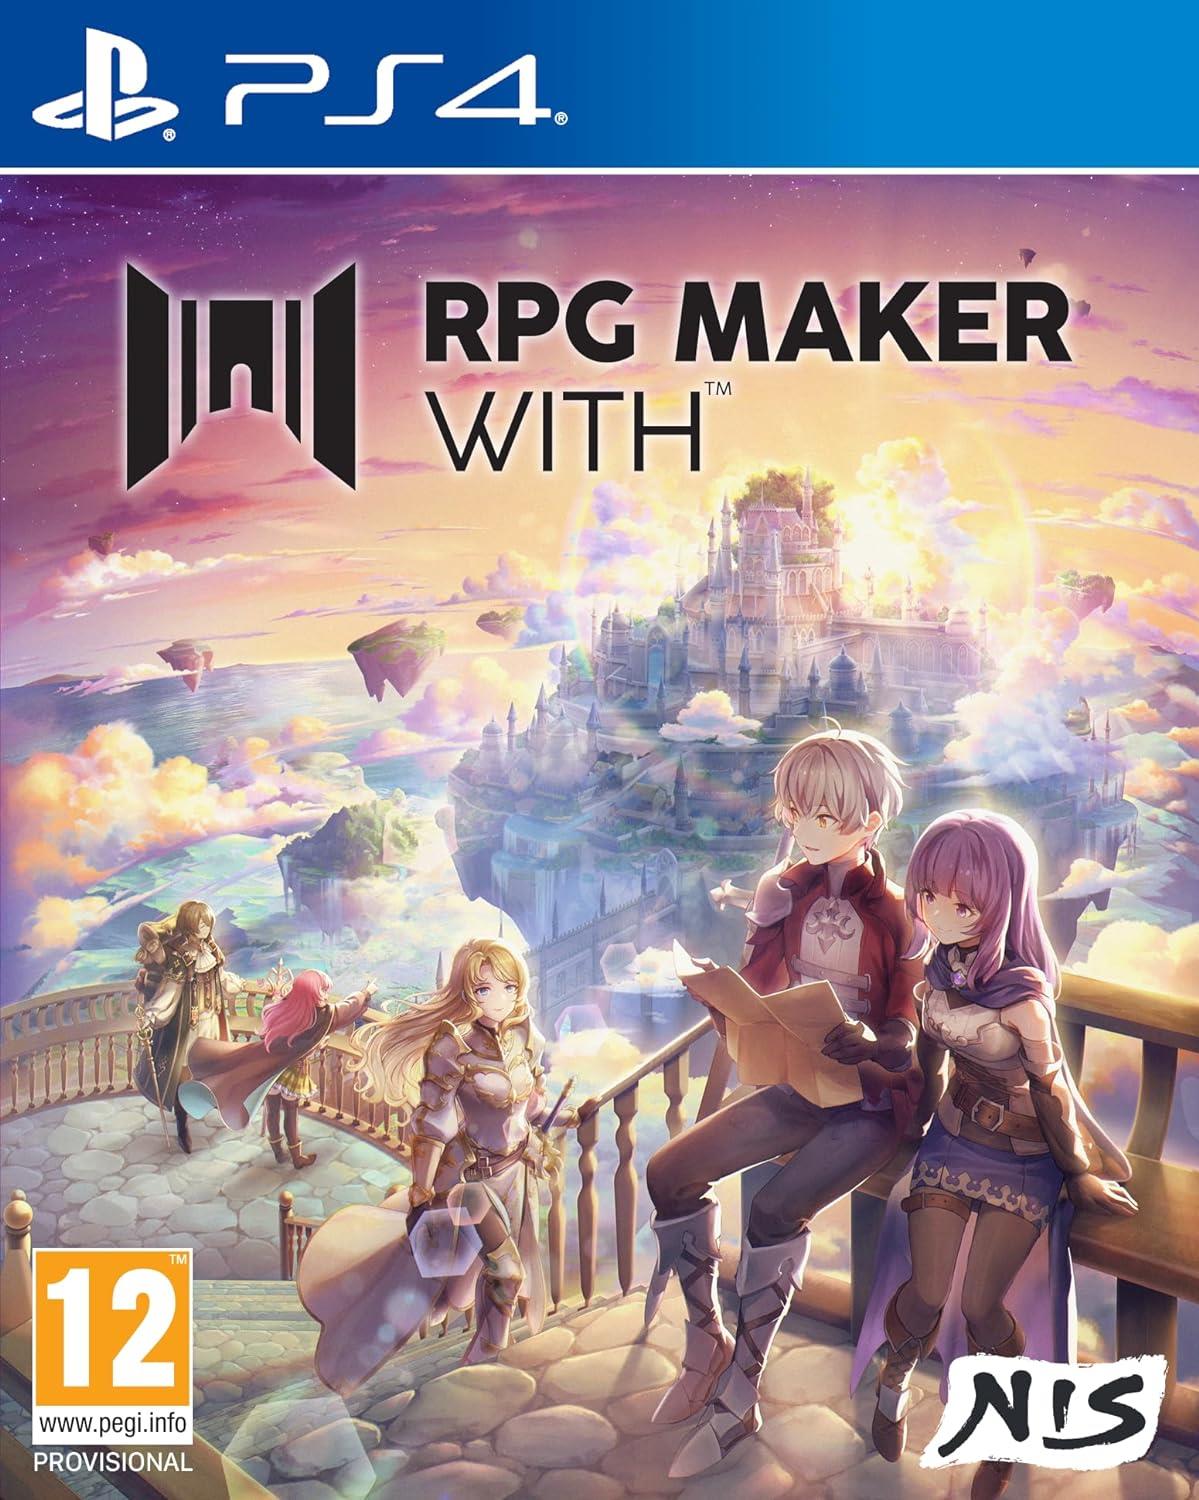 RPG MAKER WITH PS4 Game